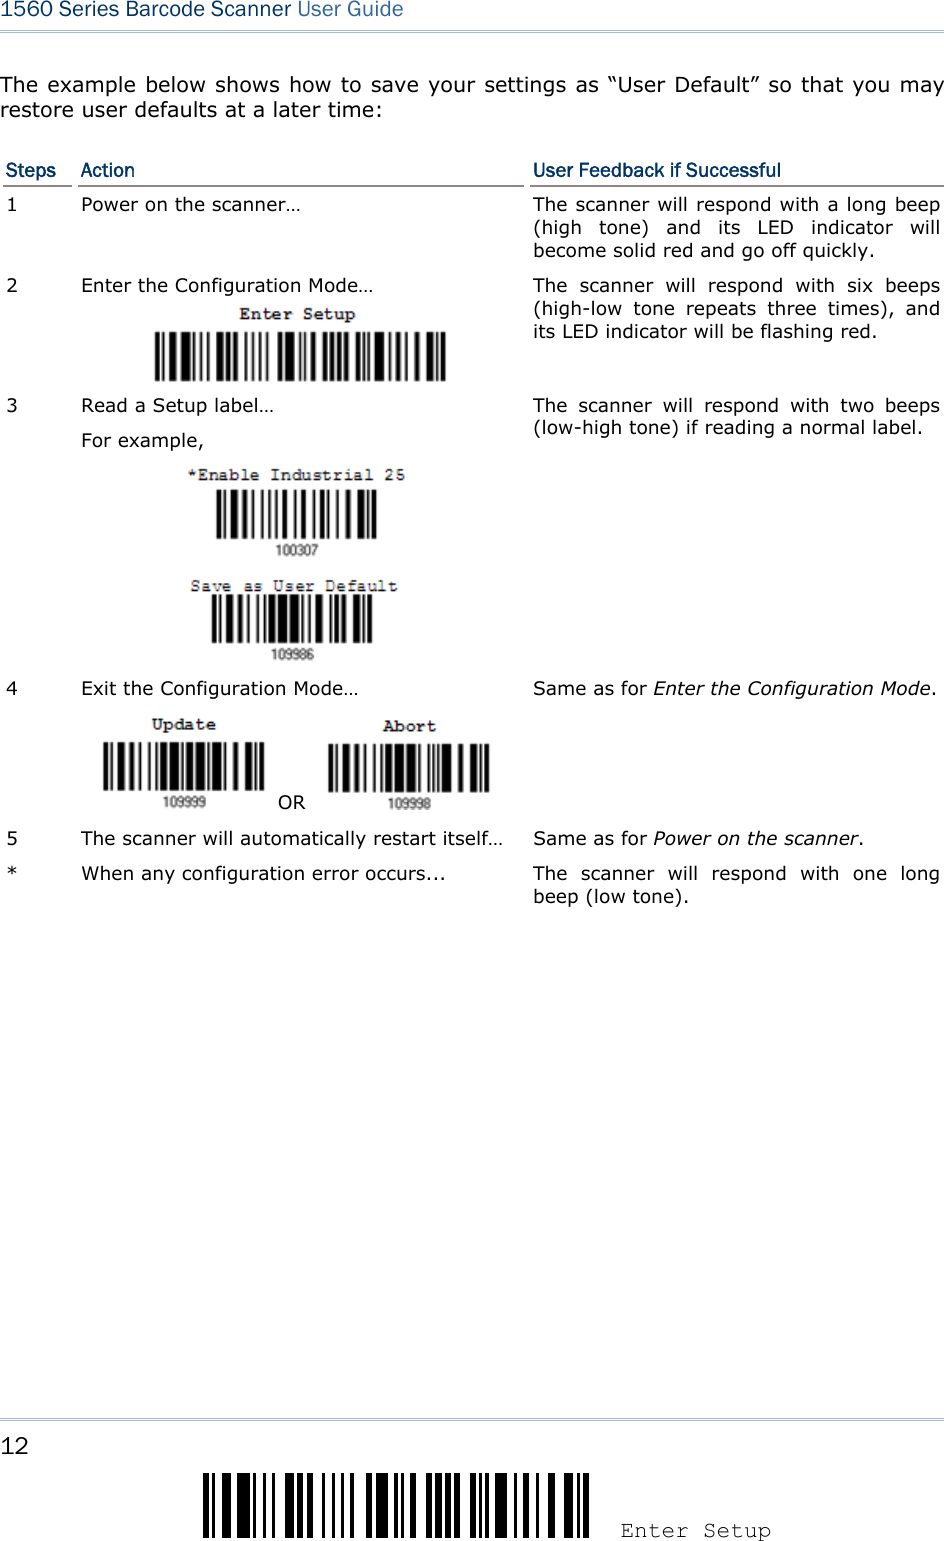 12 Enter Setup 1560 Series Barcode Scanner User Guide  The example below shows how to save your settings as “User Default” so that you may restore user defaults at a later time: Steps  Action  User Feedback if Successful 1  Power on the scanner… The scanner will respond with a long beep (high tone) and its LED indicator will become solid red and go off quickly. 2  Enter the Configuration Mode…  The scanner will respond with six beeps (high-low tone repeats three times), and its LED indicator will be flashing red.  3  Read a Setup label… For example,               The scanner will respond with two beeps (low-high tone) if reading a normal label. 4  Exit the Configuration Mode…     OR    Same as for Enter the Configuration Mode. 5  The scanner will automatically restart itself…  Same as for Power on the scanner. *  When any configuration error occurs... The scanner will respond with one long beep (low tone).  